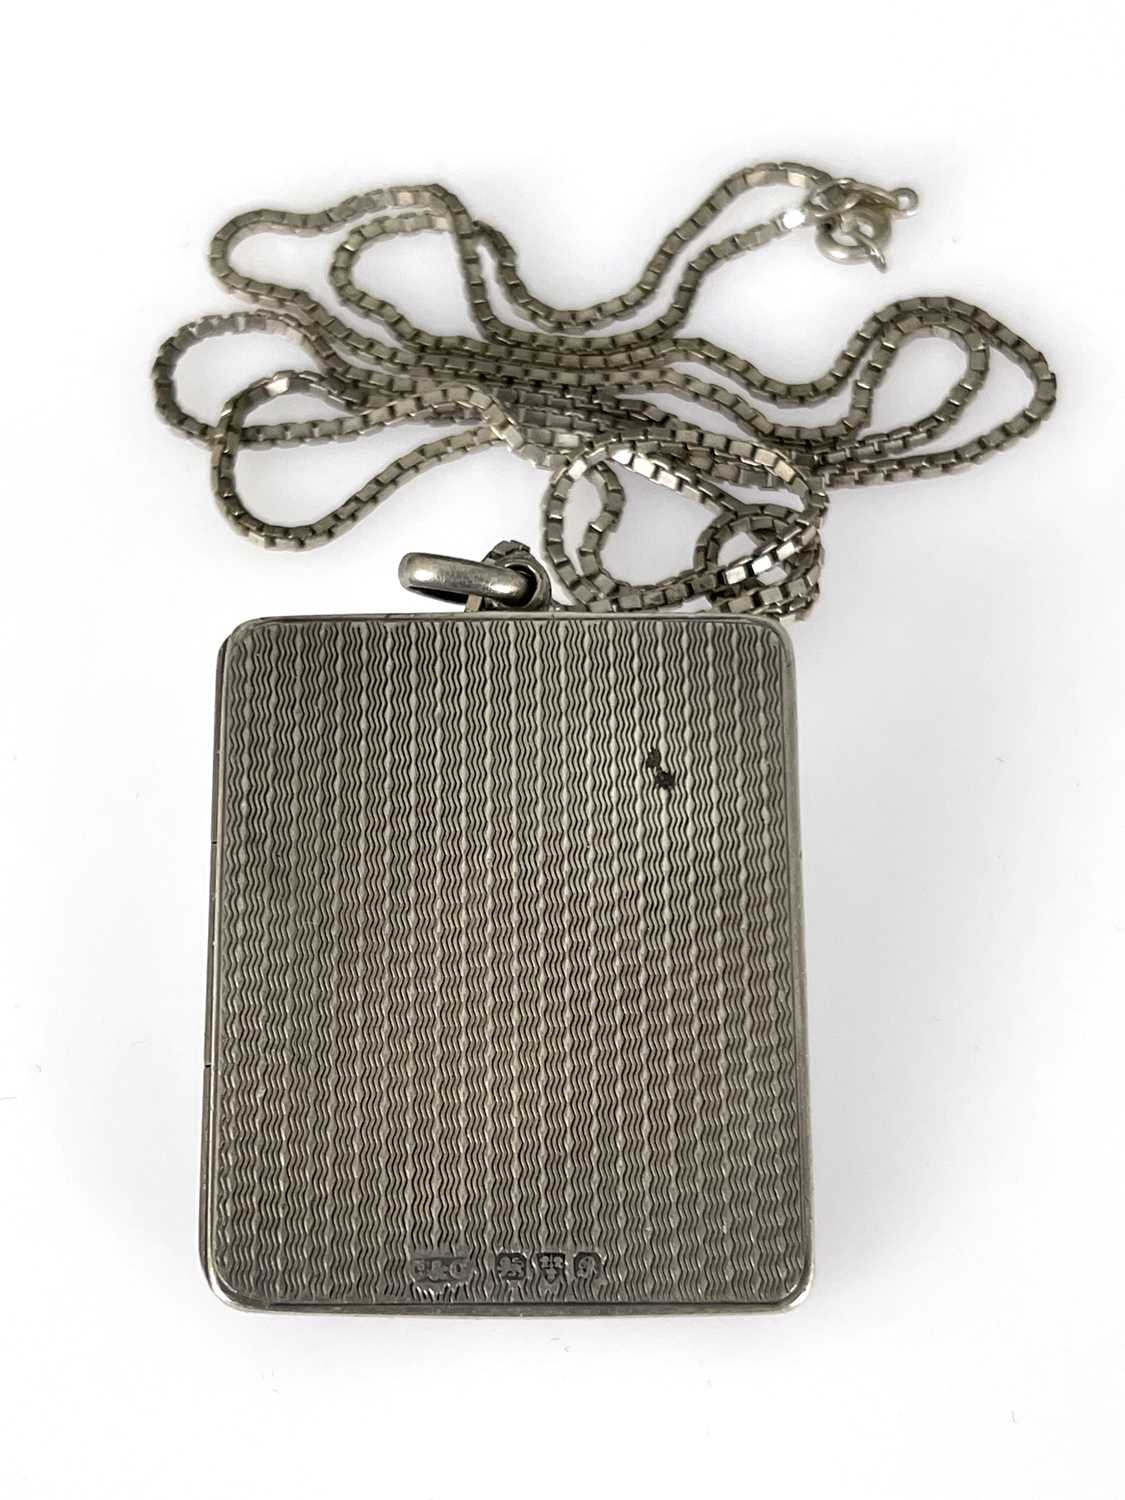 A George V silver pendant locket photo frame, Cohen and Charles, Chester 1917, rectangular form, - Image 3 of 4